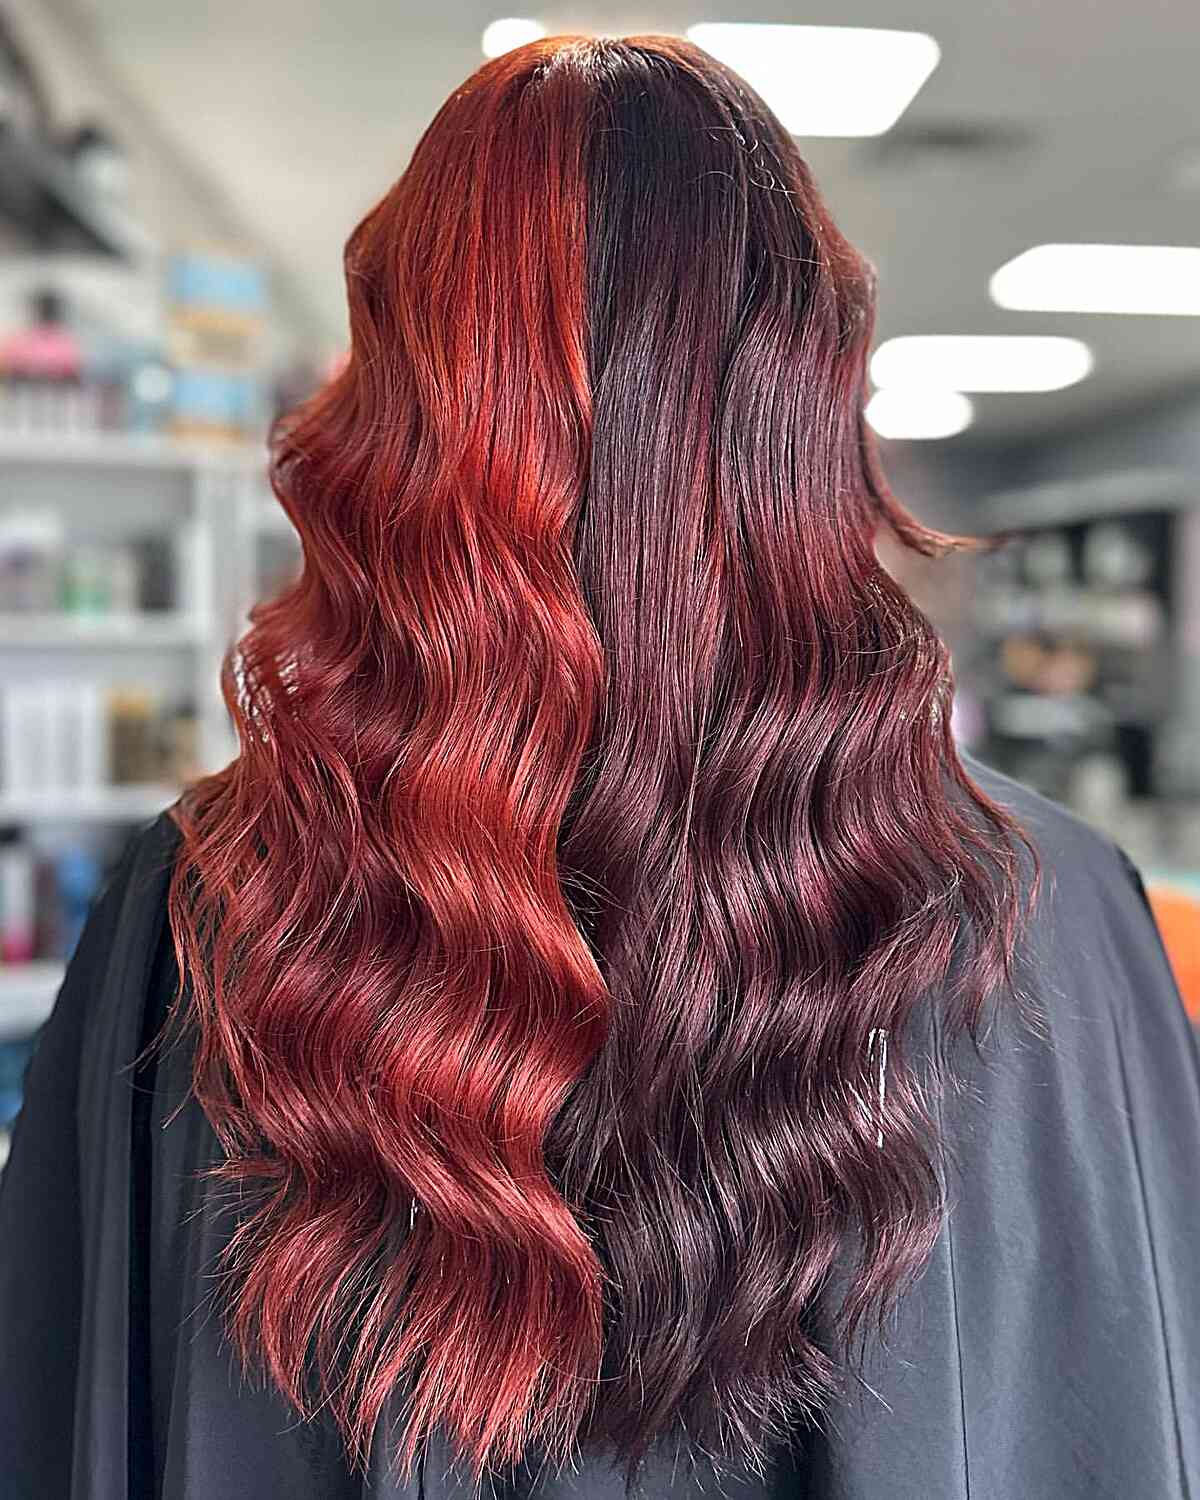 Long Hair with Fiery Red and Deep Mahogany Split Dye